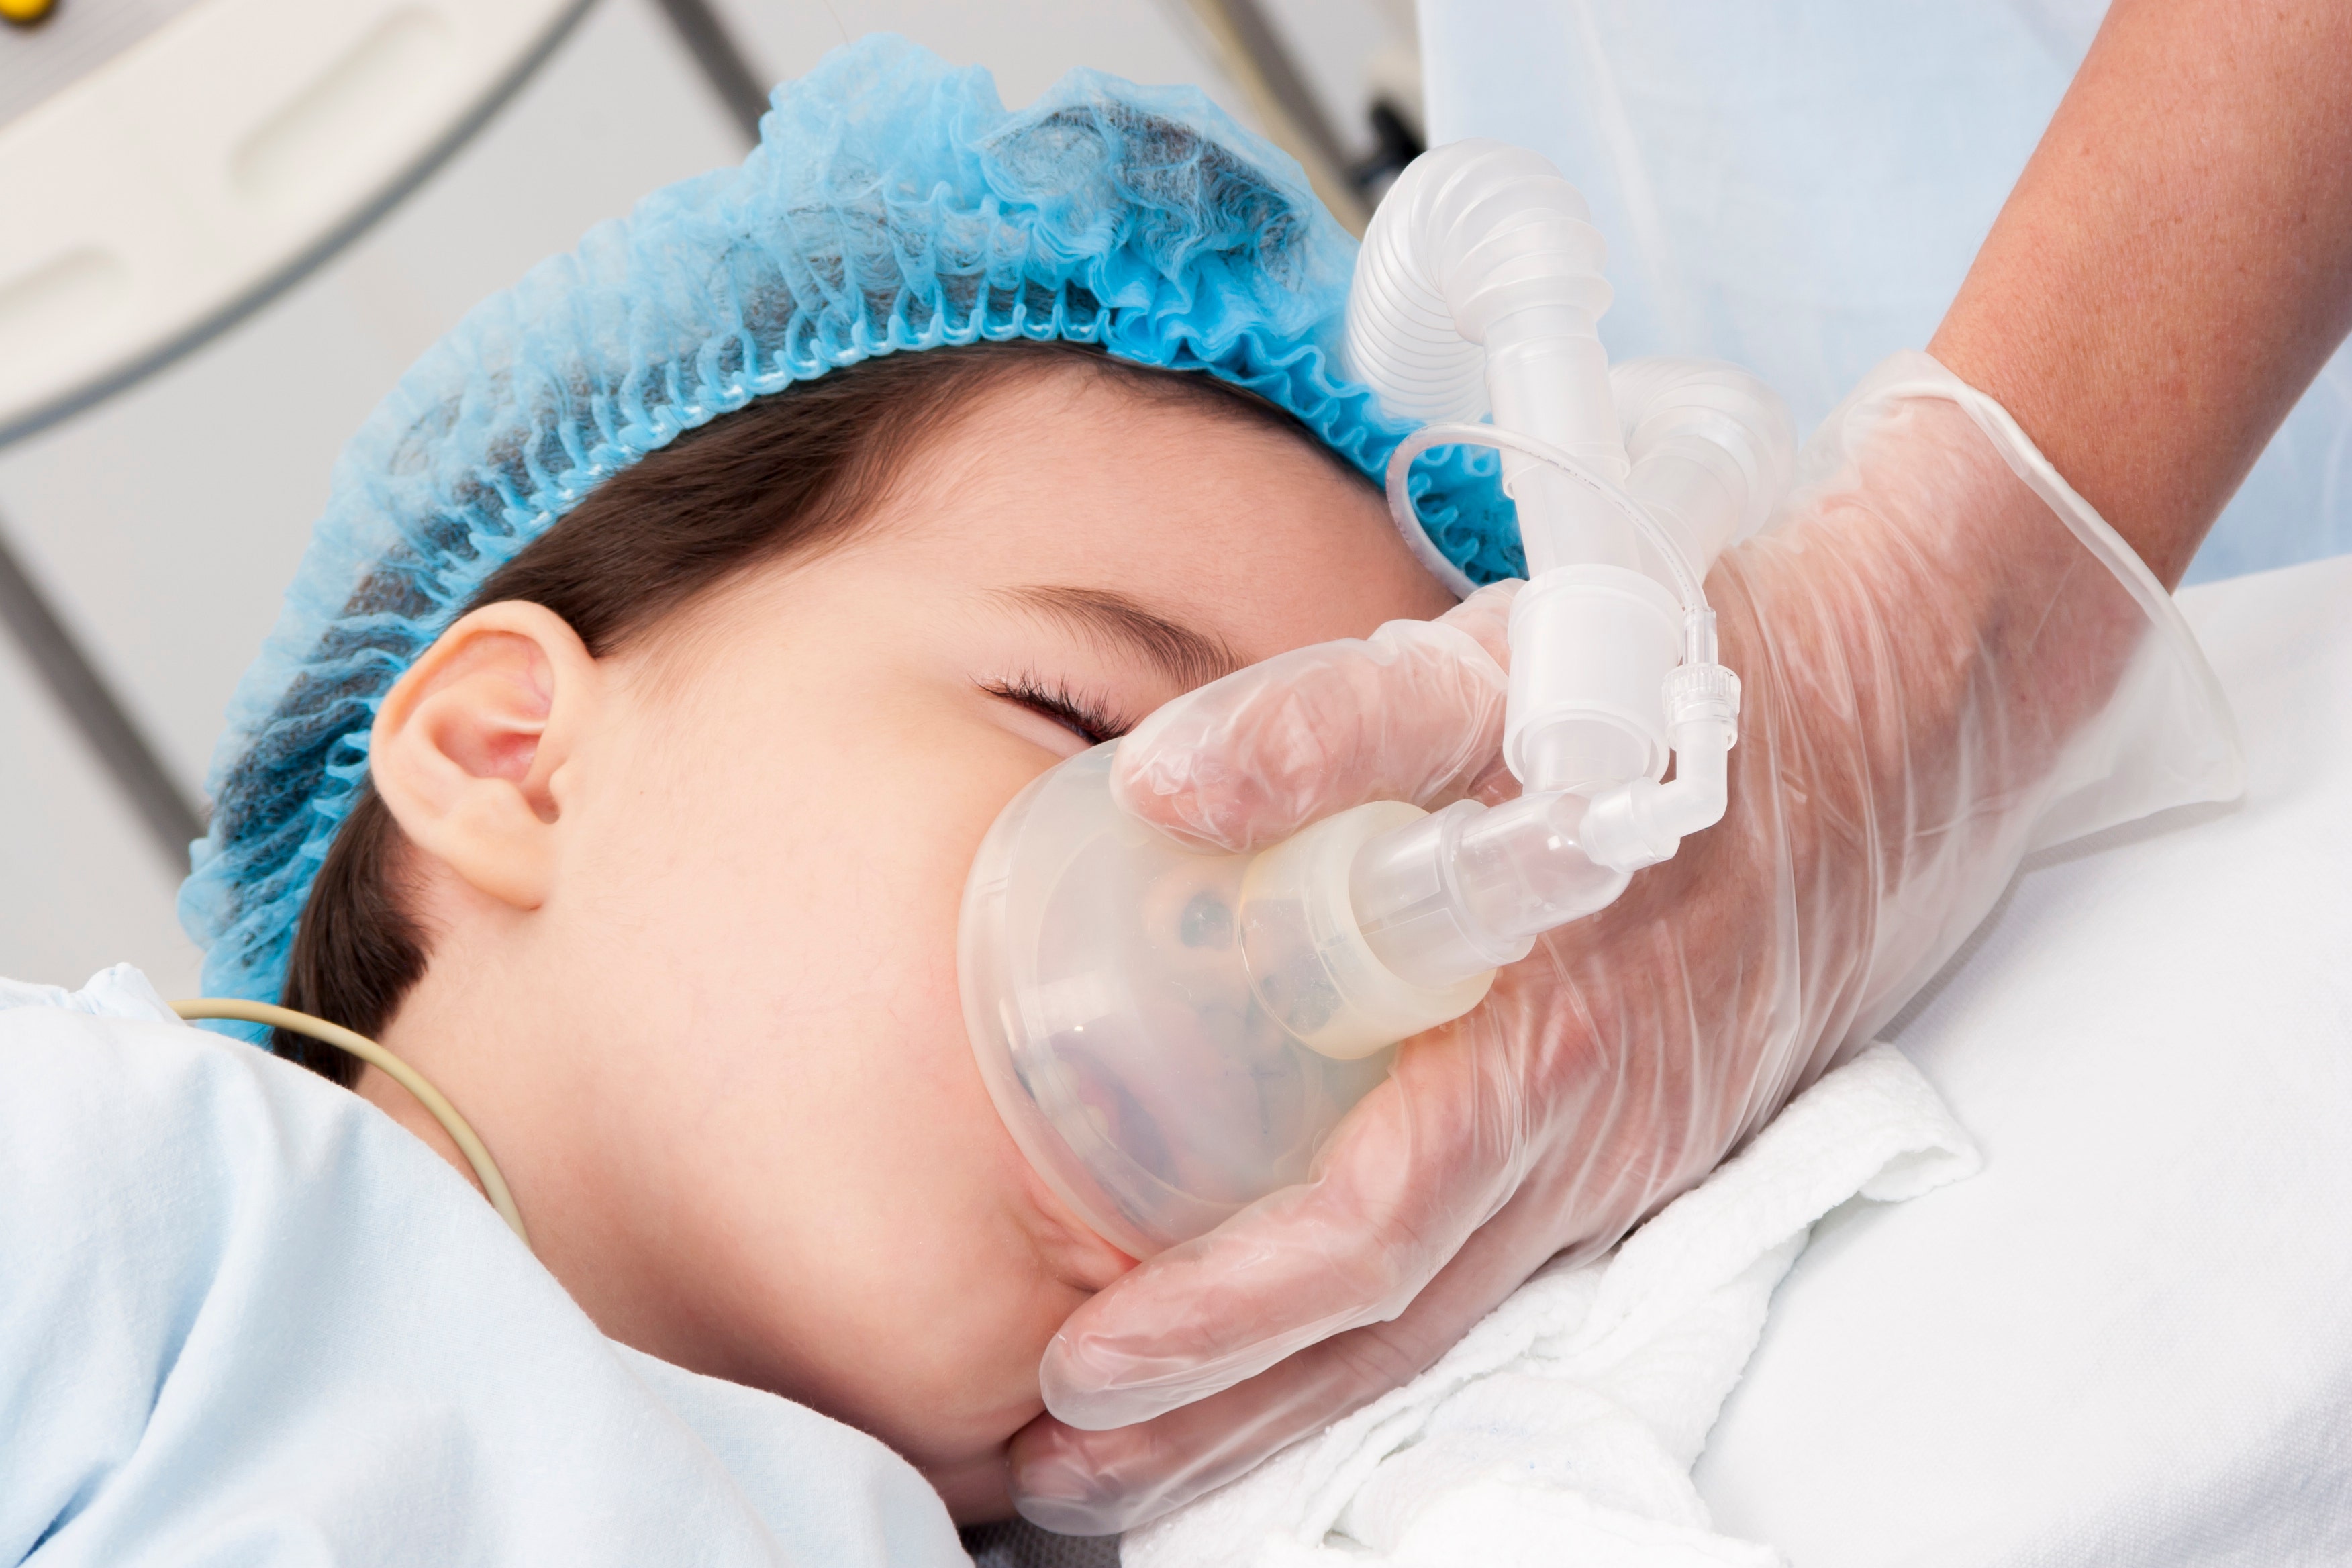 Cases of inflammatory condition, MIS-C, in children spike at pediatric hospital